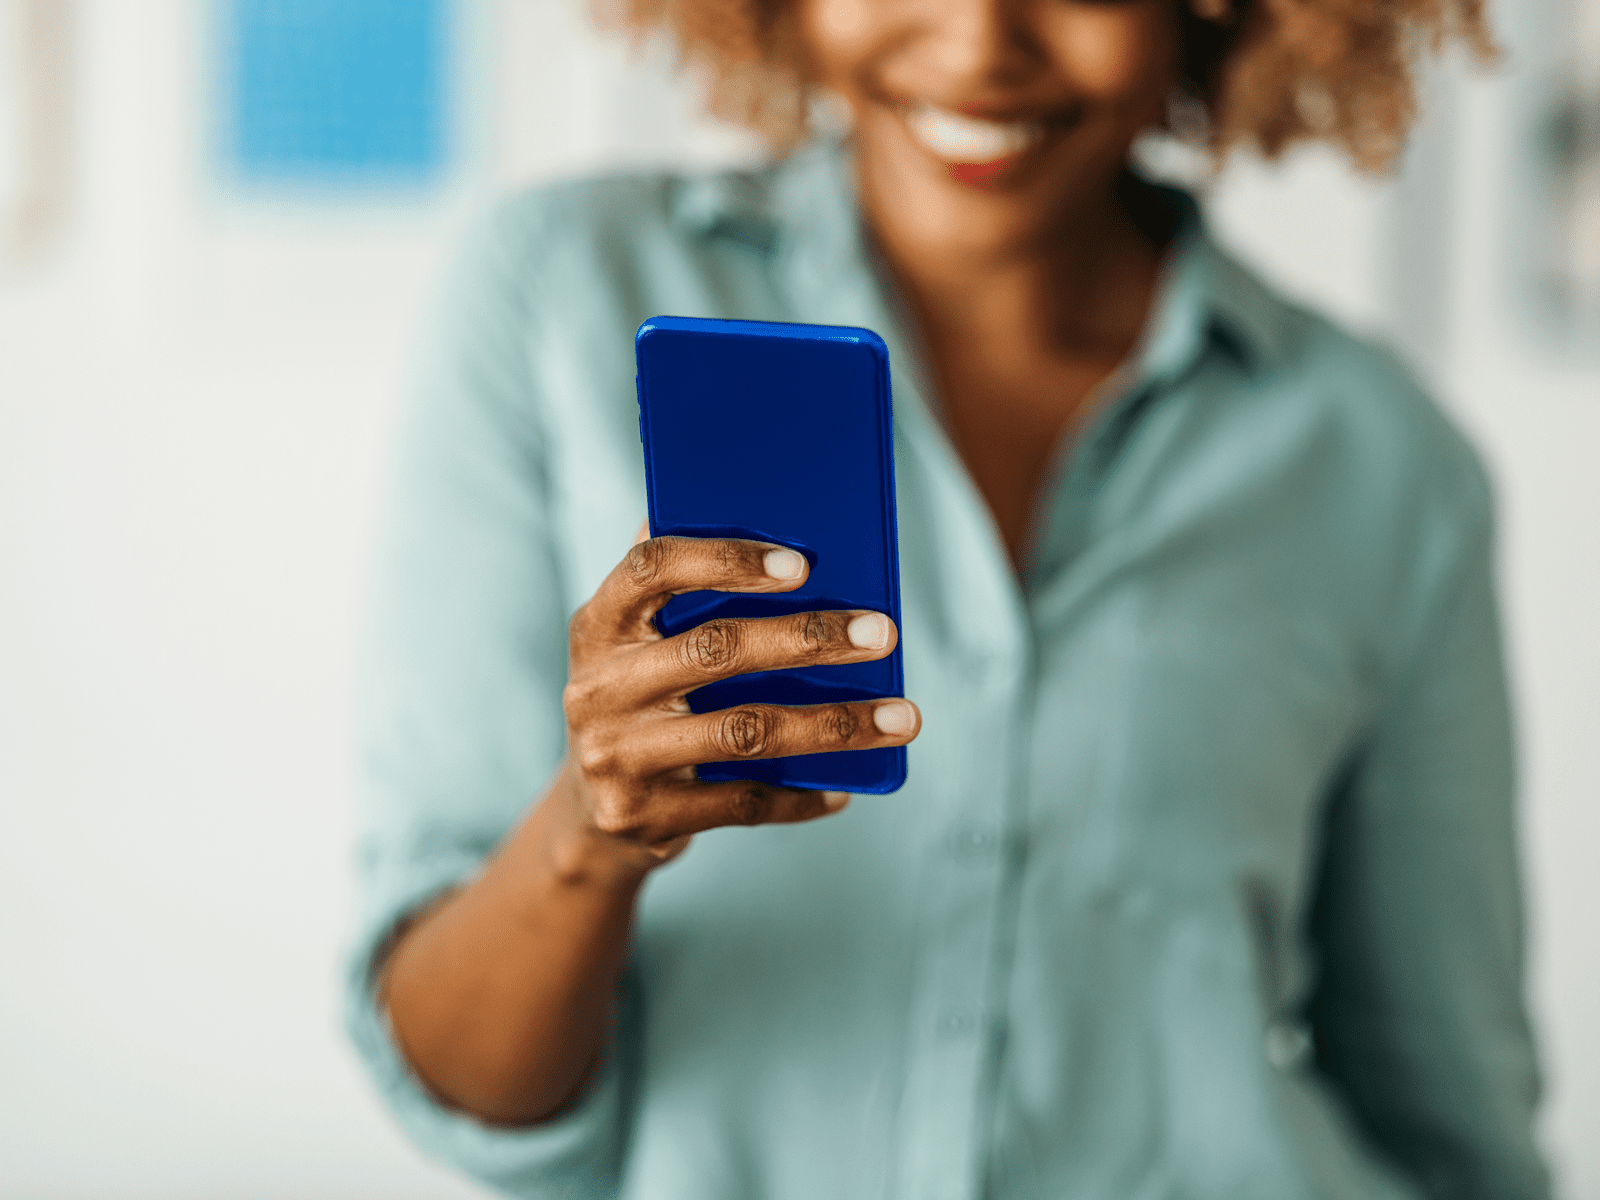 Woman smiling holding blue phone